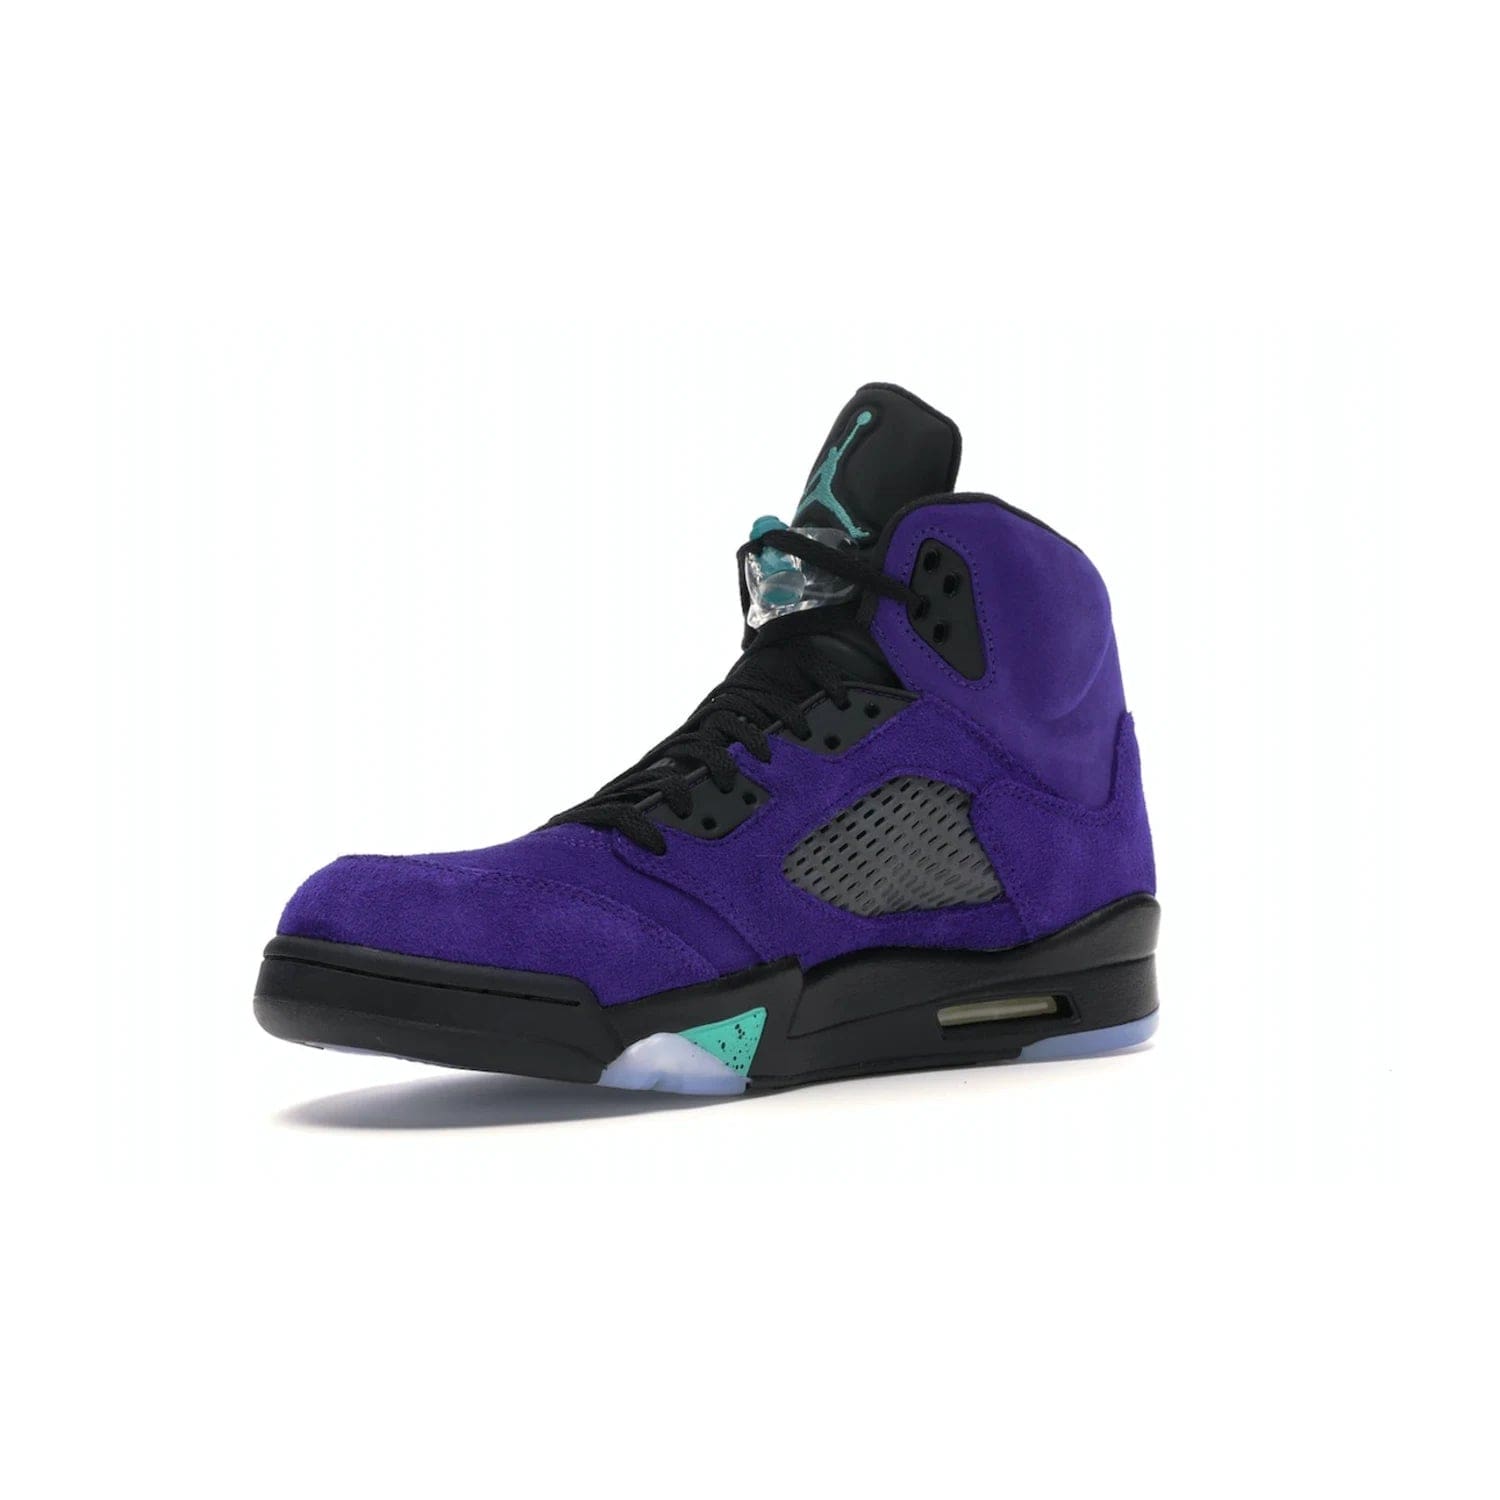 Jordan 5 Retro Alternate Grape - Image 15 - Only at www.BallersClubKickz.com - Bring the classic Jordan 5 Retro Alternate Grape to your sneaker collection! Featuring a purple suede upper, charcoal underlays, green detailing, and an icy and green outsole. Releasing for the first time since 1990, don't miss this chance to add a piece of sneaker history to your collection.